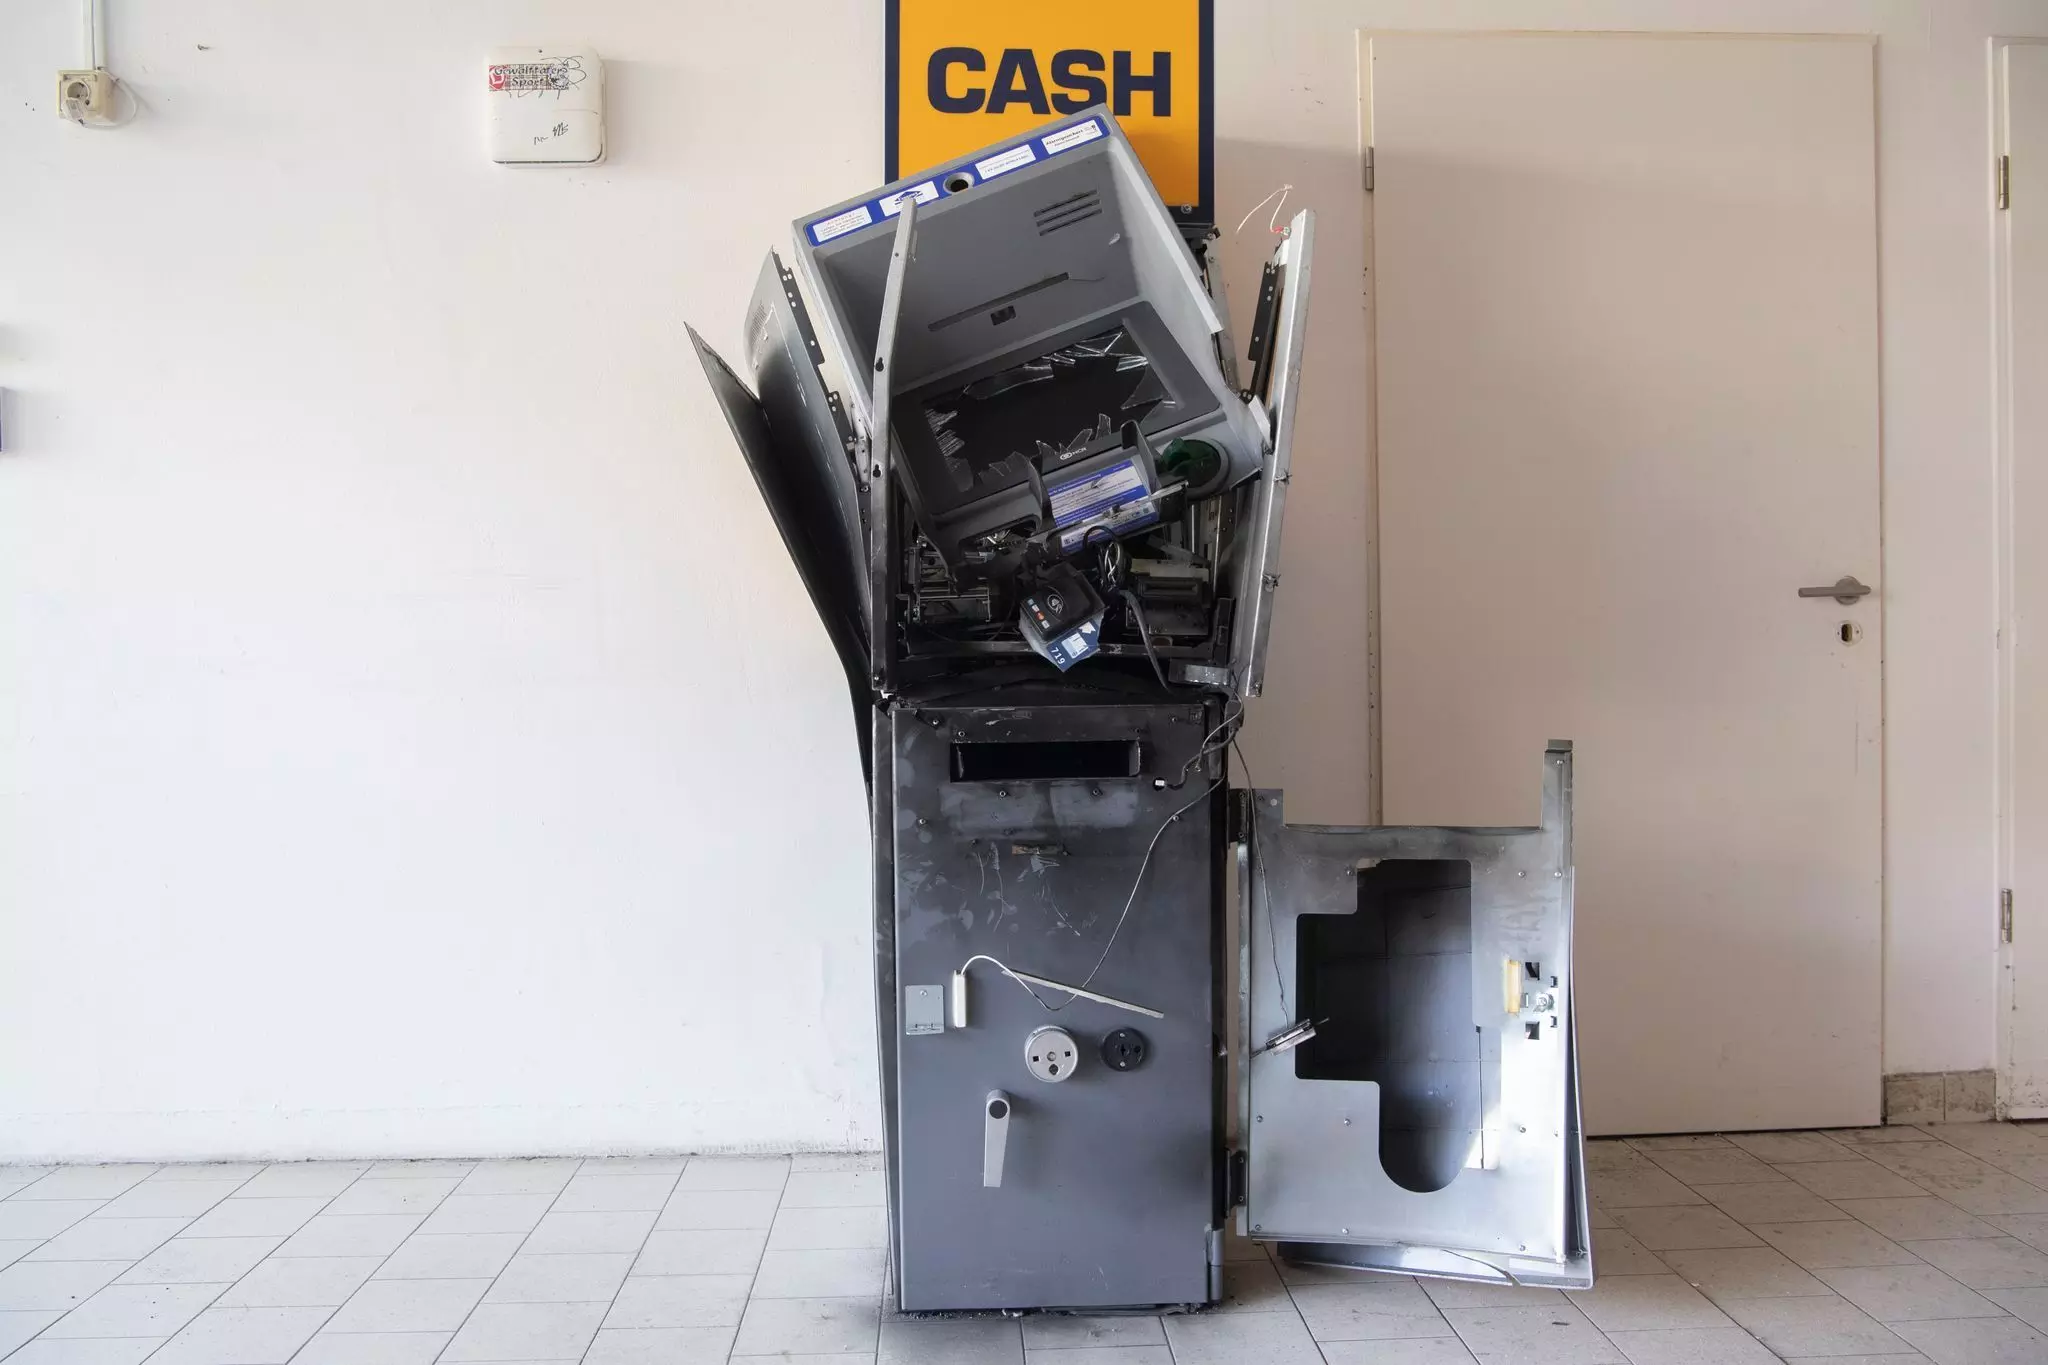 Dutch gangs target Germany for blowing up cash machines